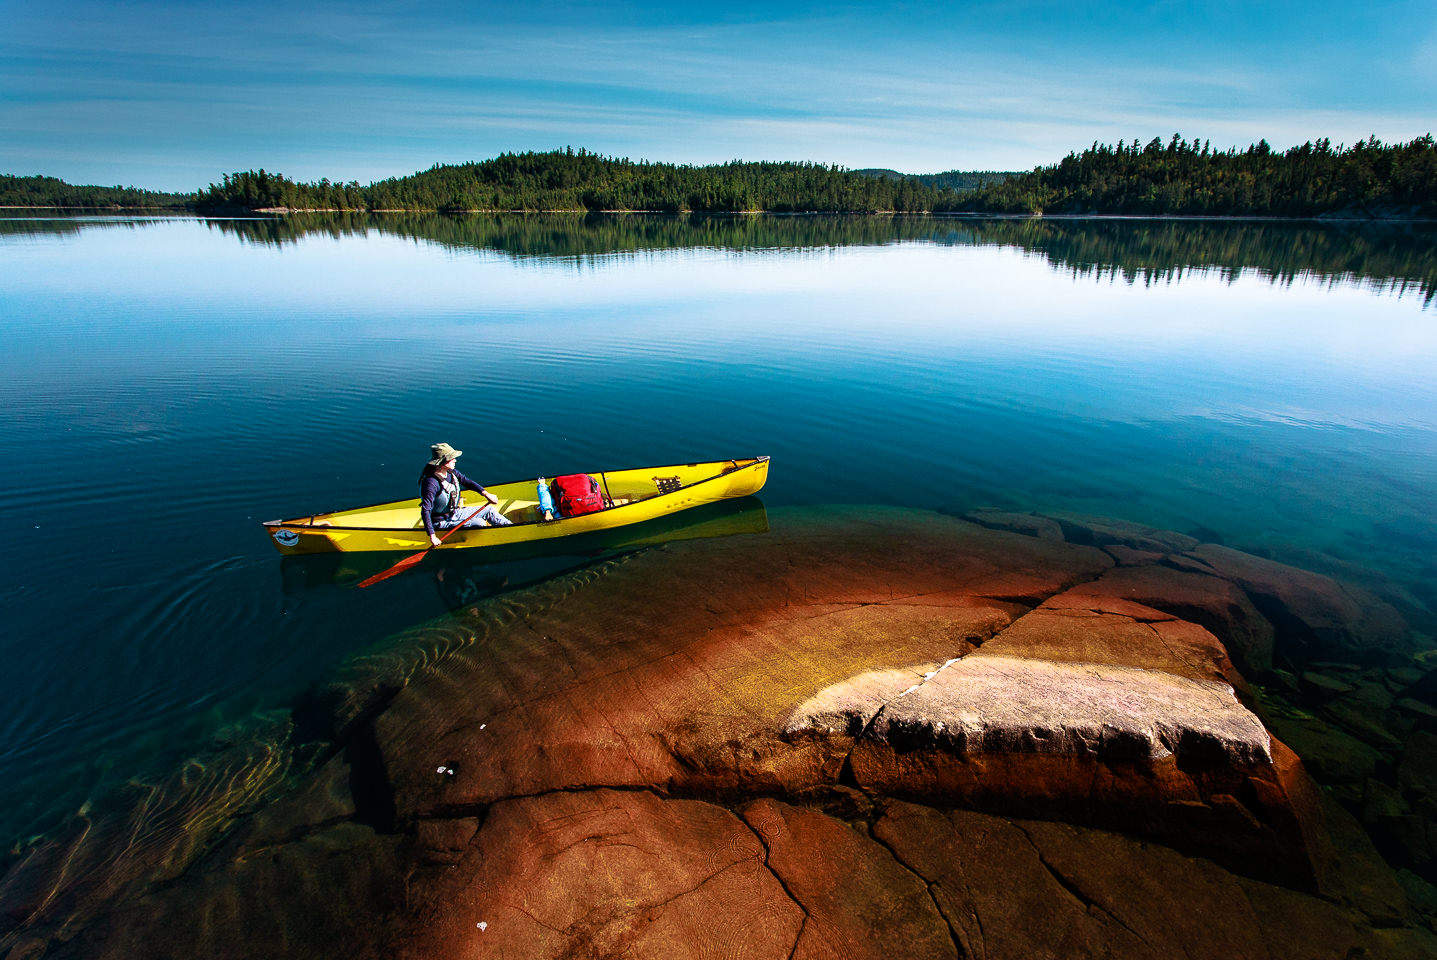 Solo canoeing in the heart of Temagami, Ontario.